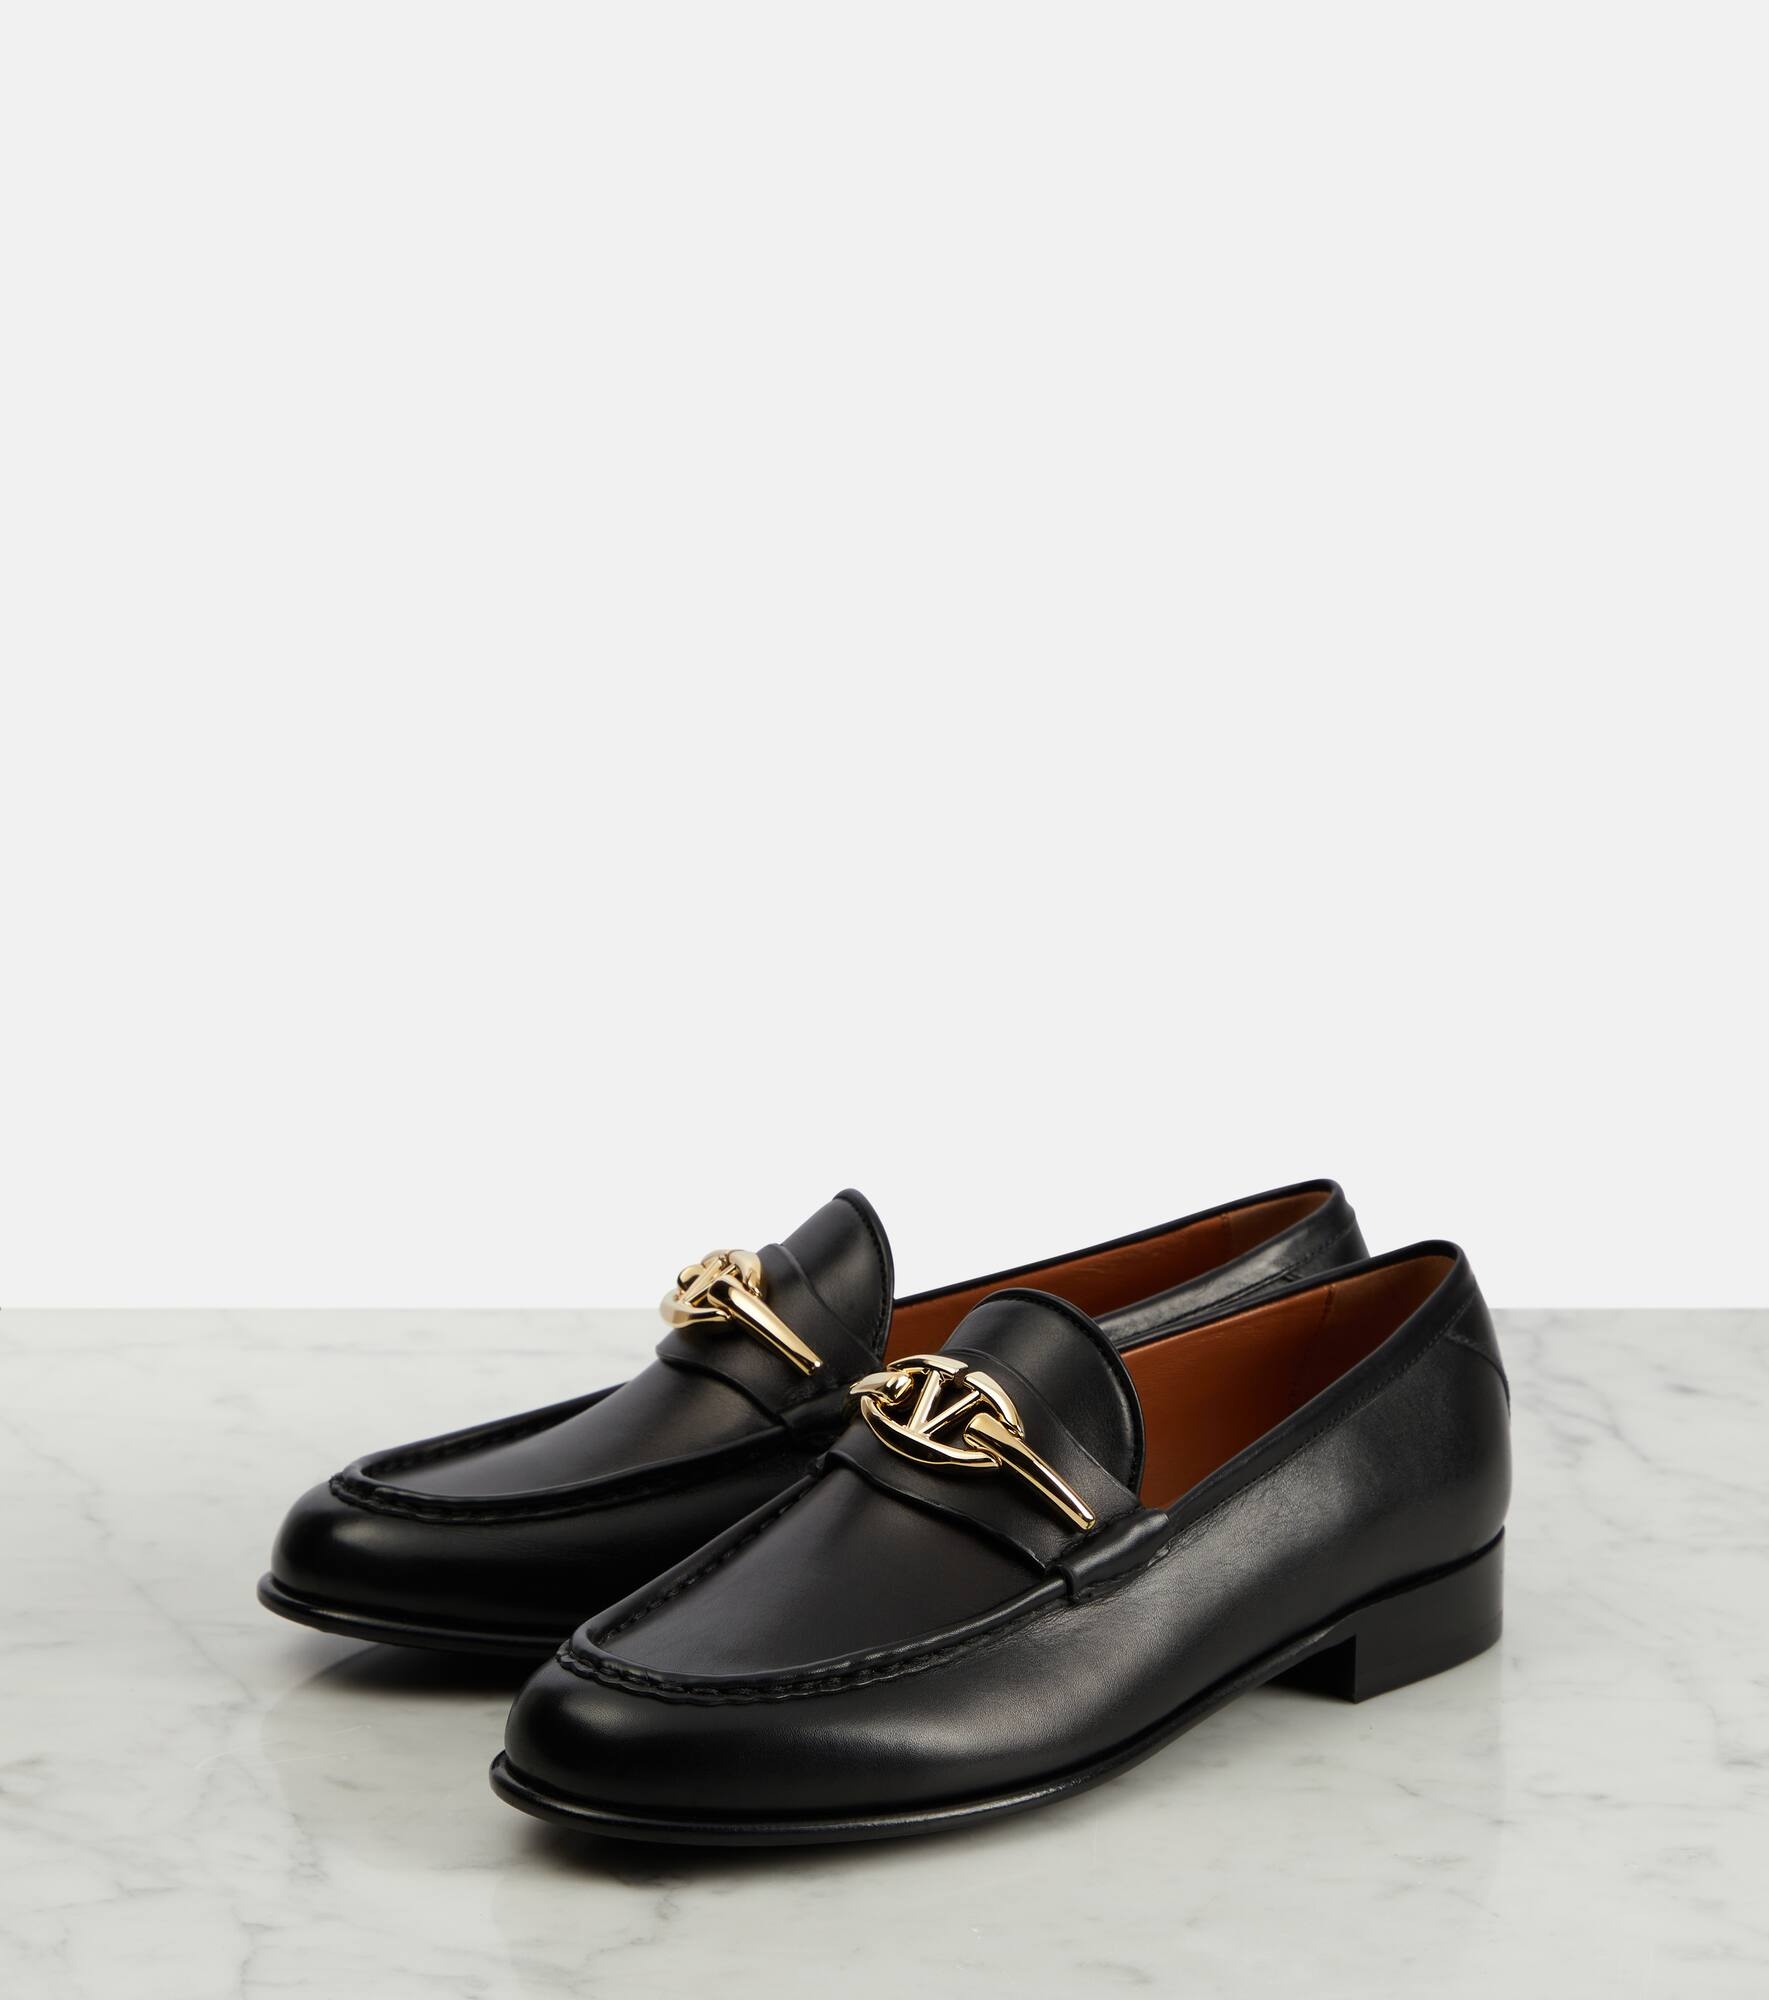 VLogo Signature leather loafers - 5